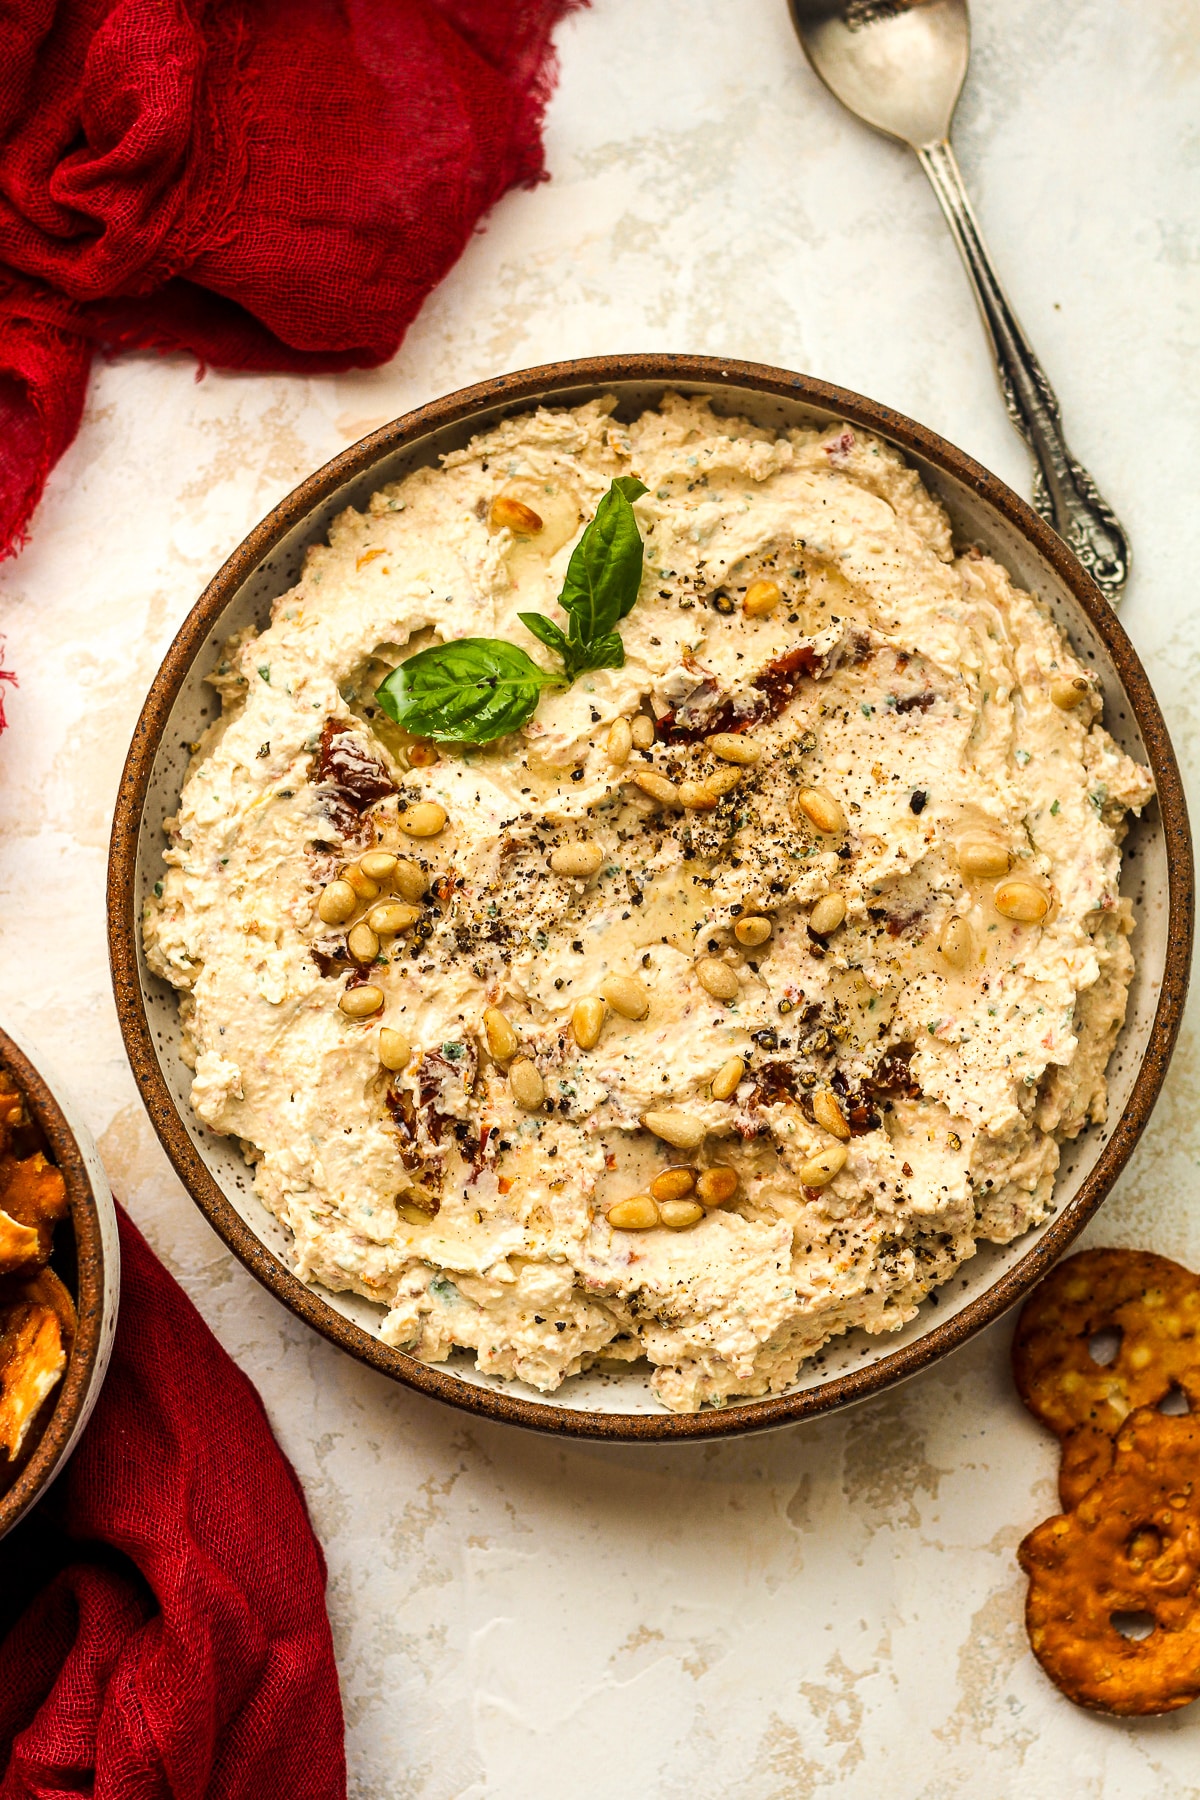 Overhead view of a bowl of cream cheese feta dip with sun-dried tomatoes.